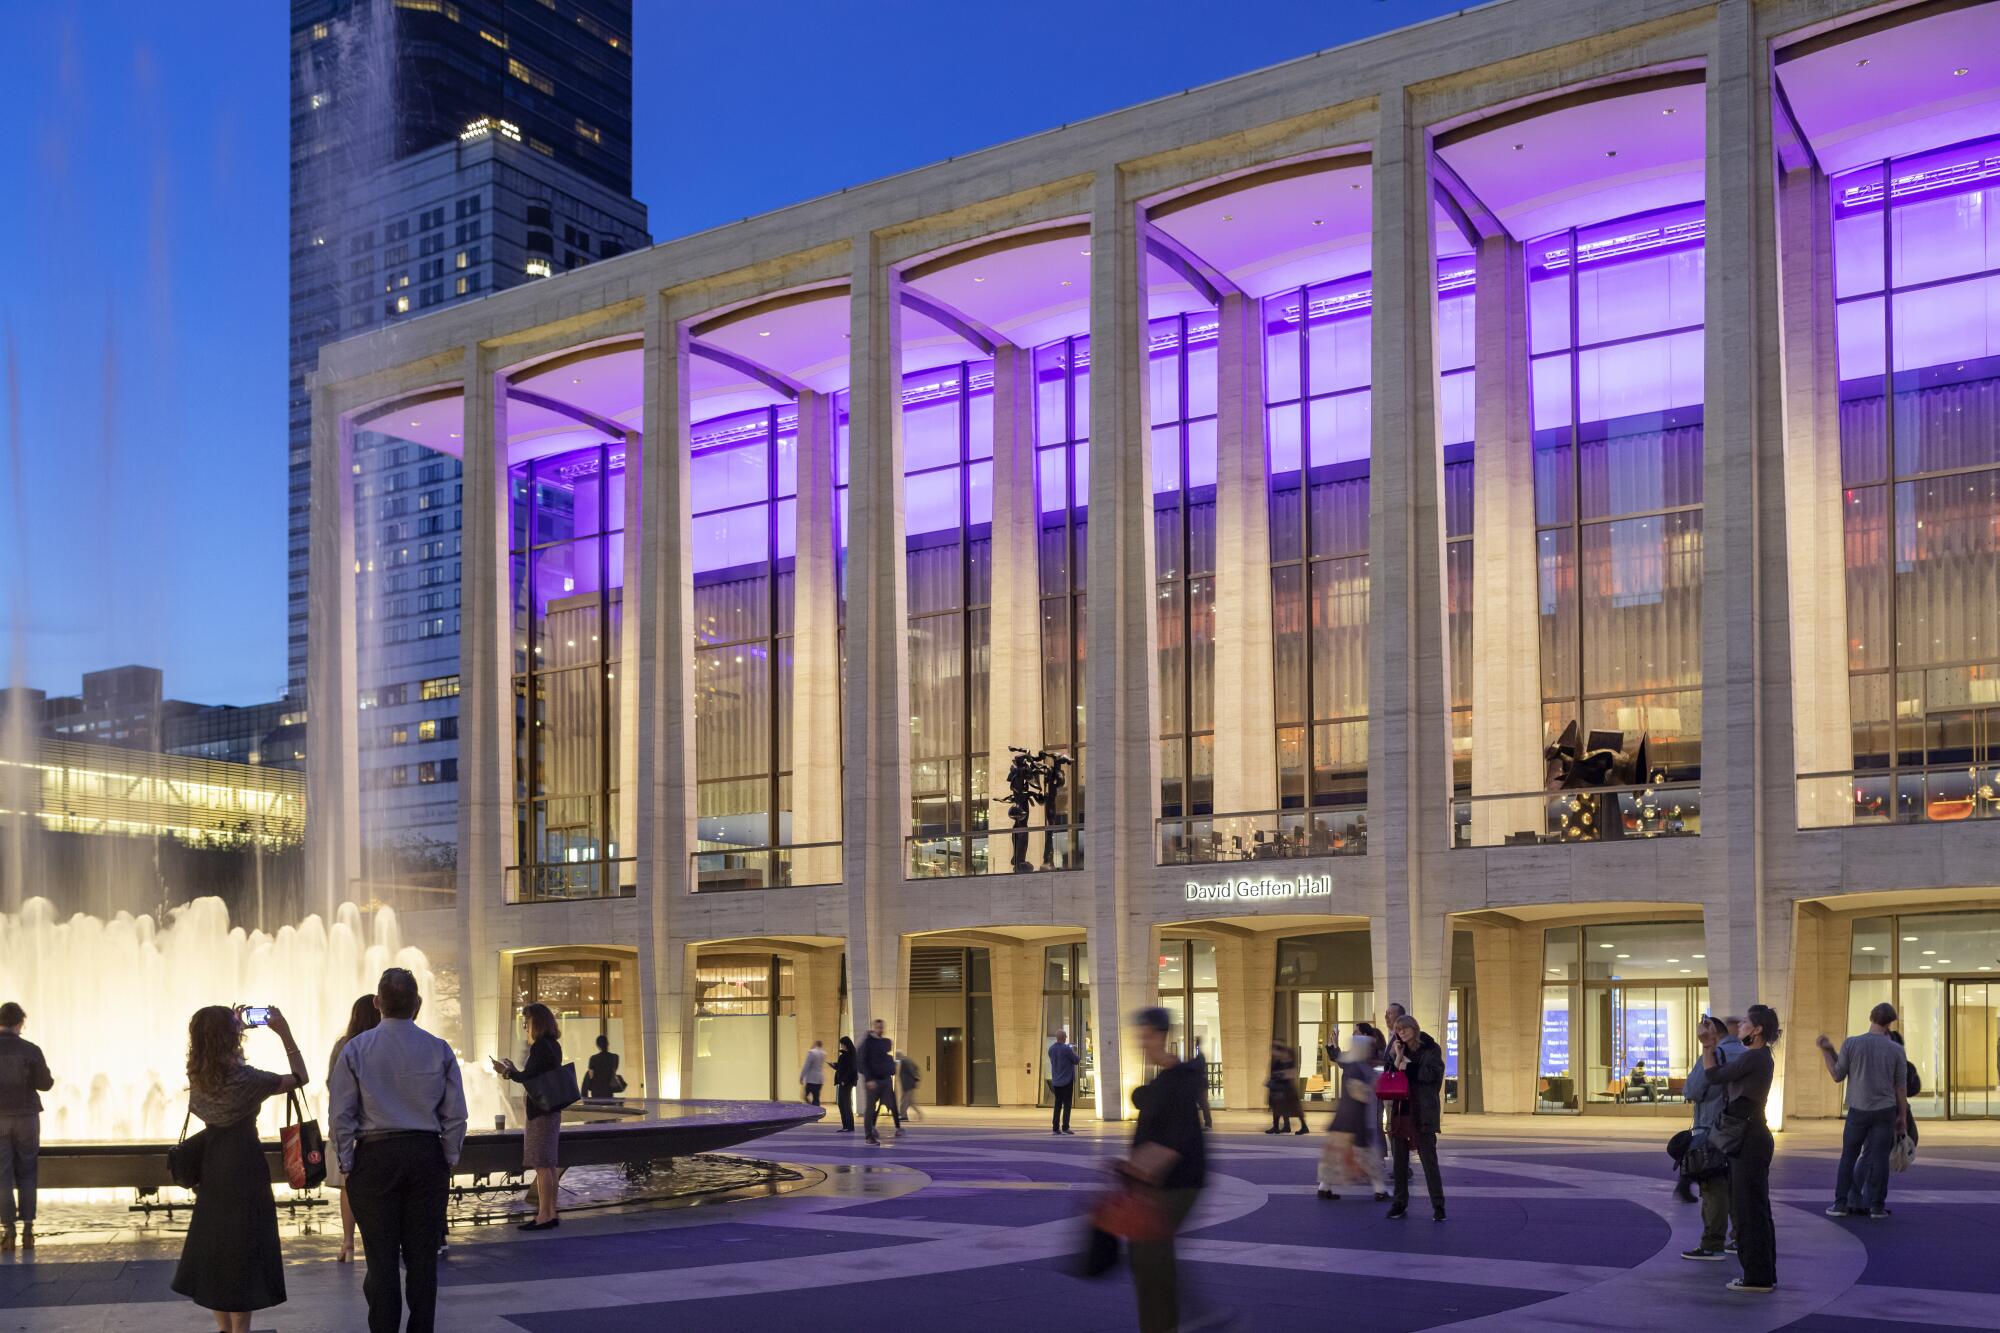 A Modernist buildling supported by gently tapering columns is illuminated with purple light from within.